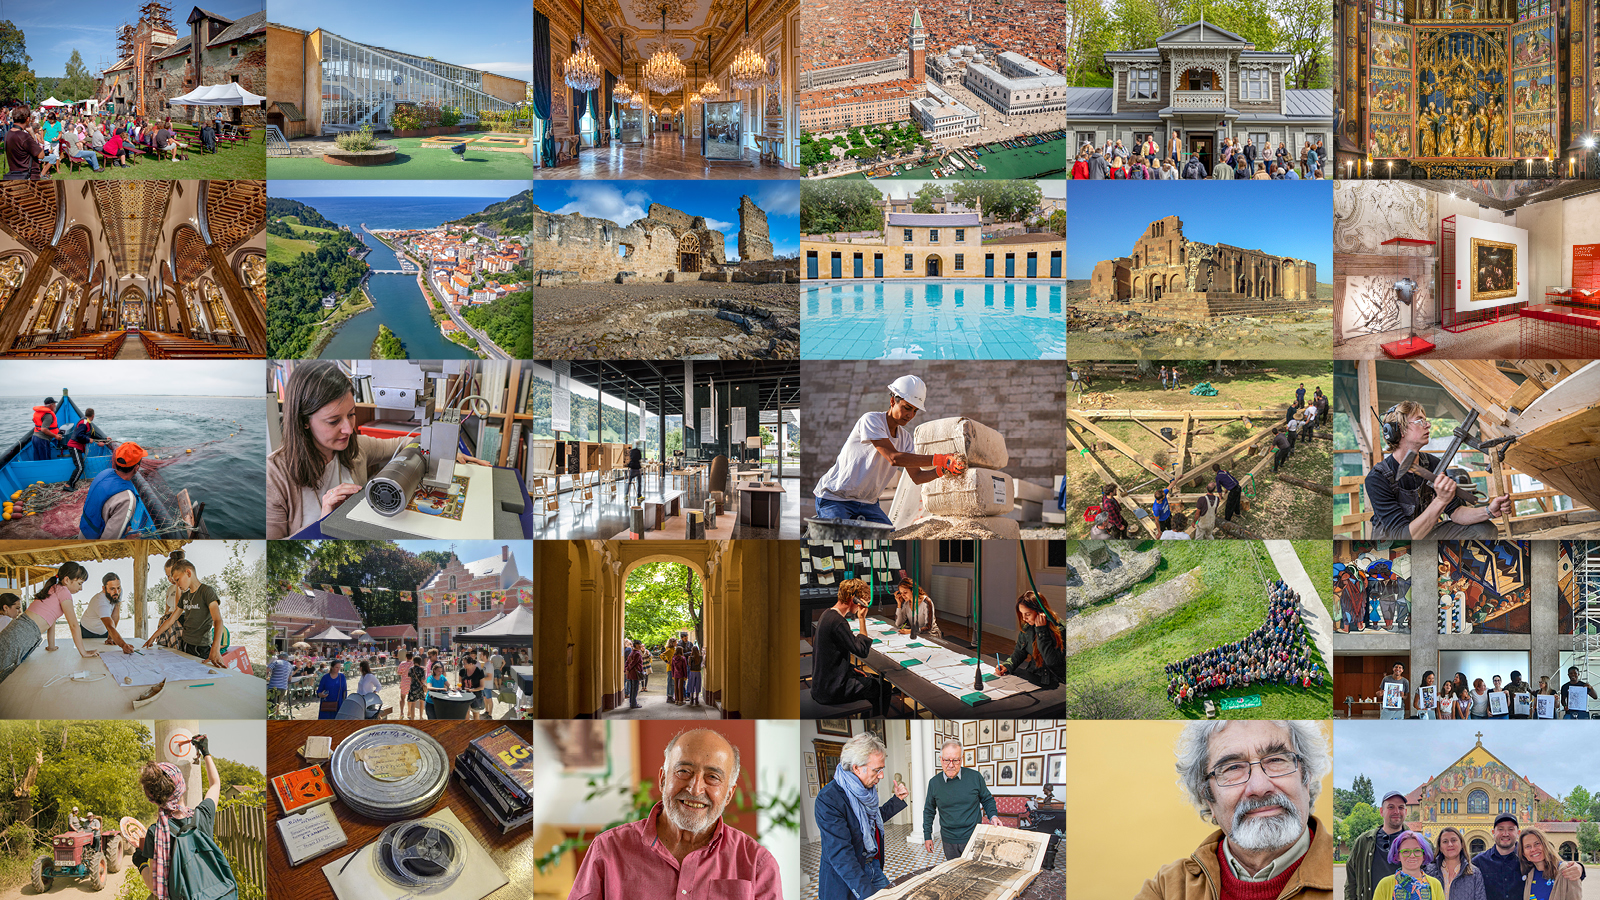 2023 European Heritage Awards winners announced | Culture and Creativity